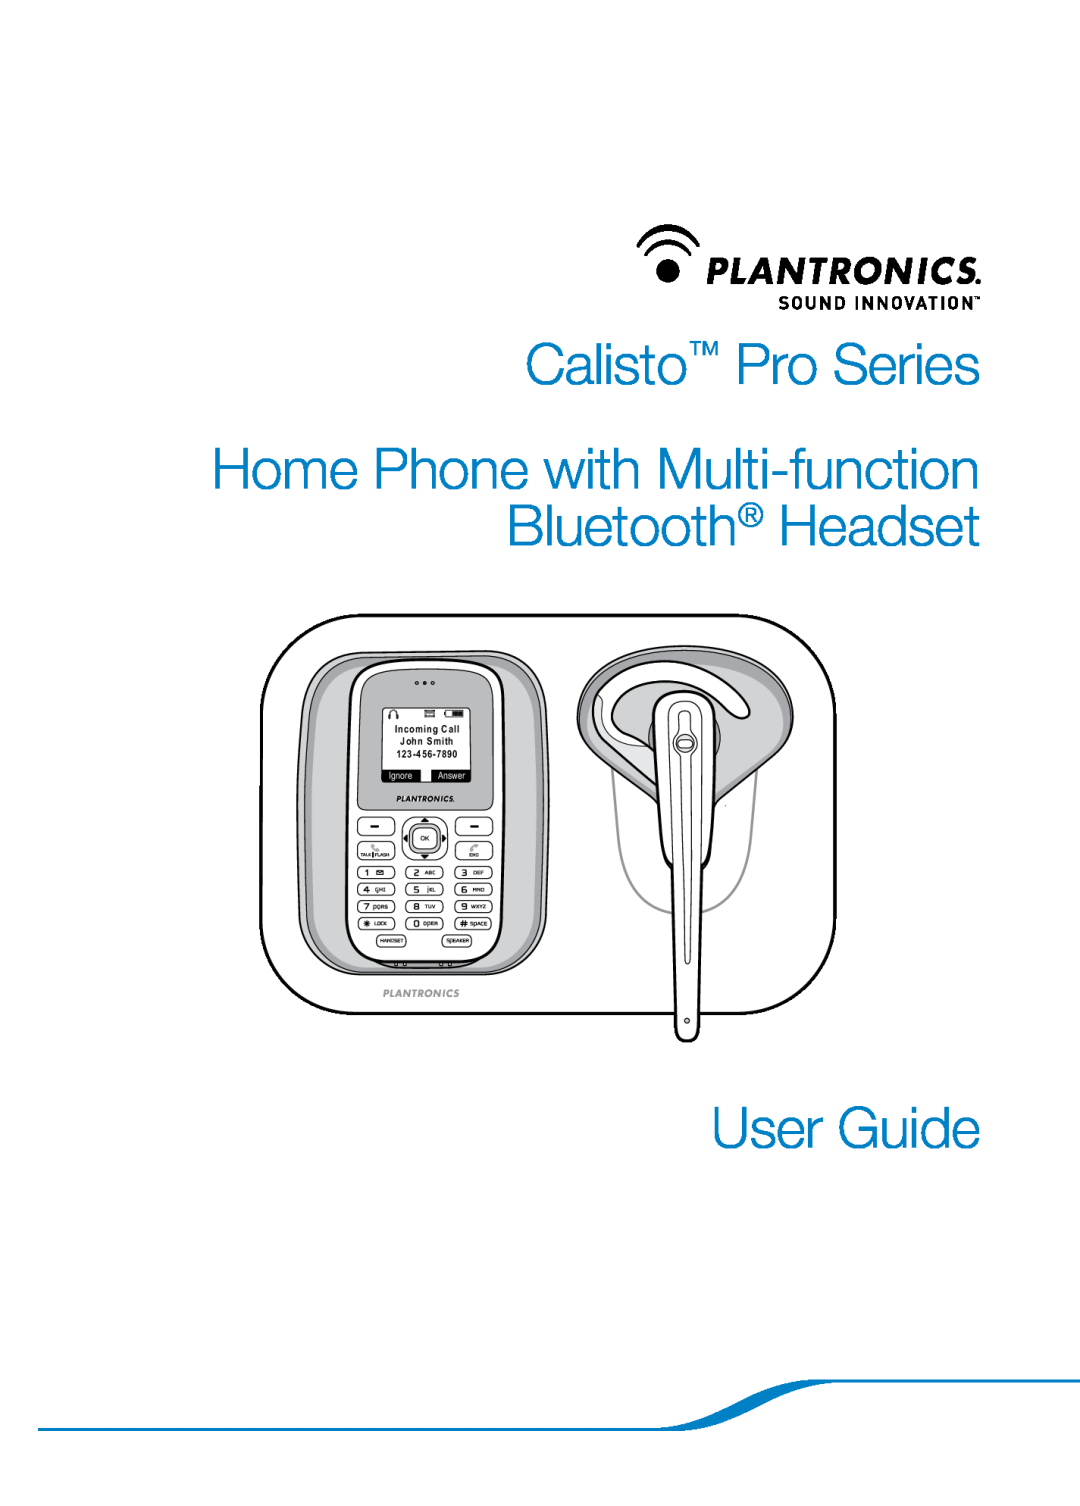 Plantronics 655 manual Calisto Pro Series, User Guide, Home Phone with Multi-functionBluetooth Headset, Ignore Answer 